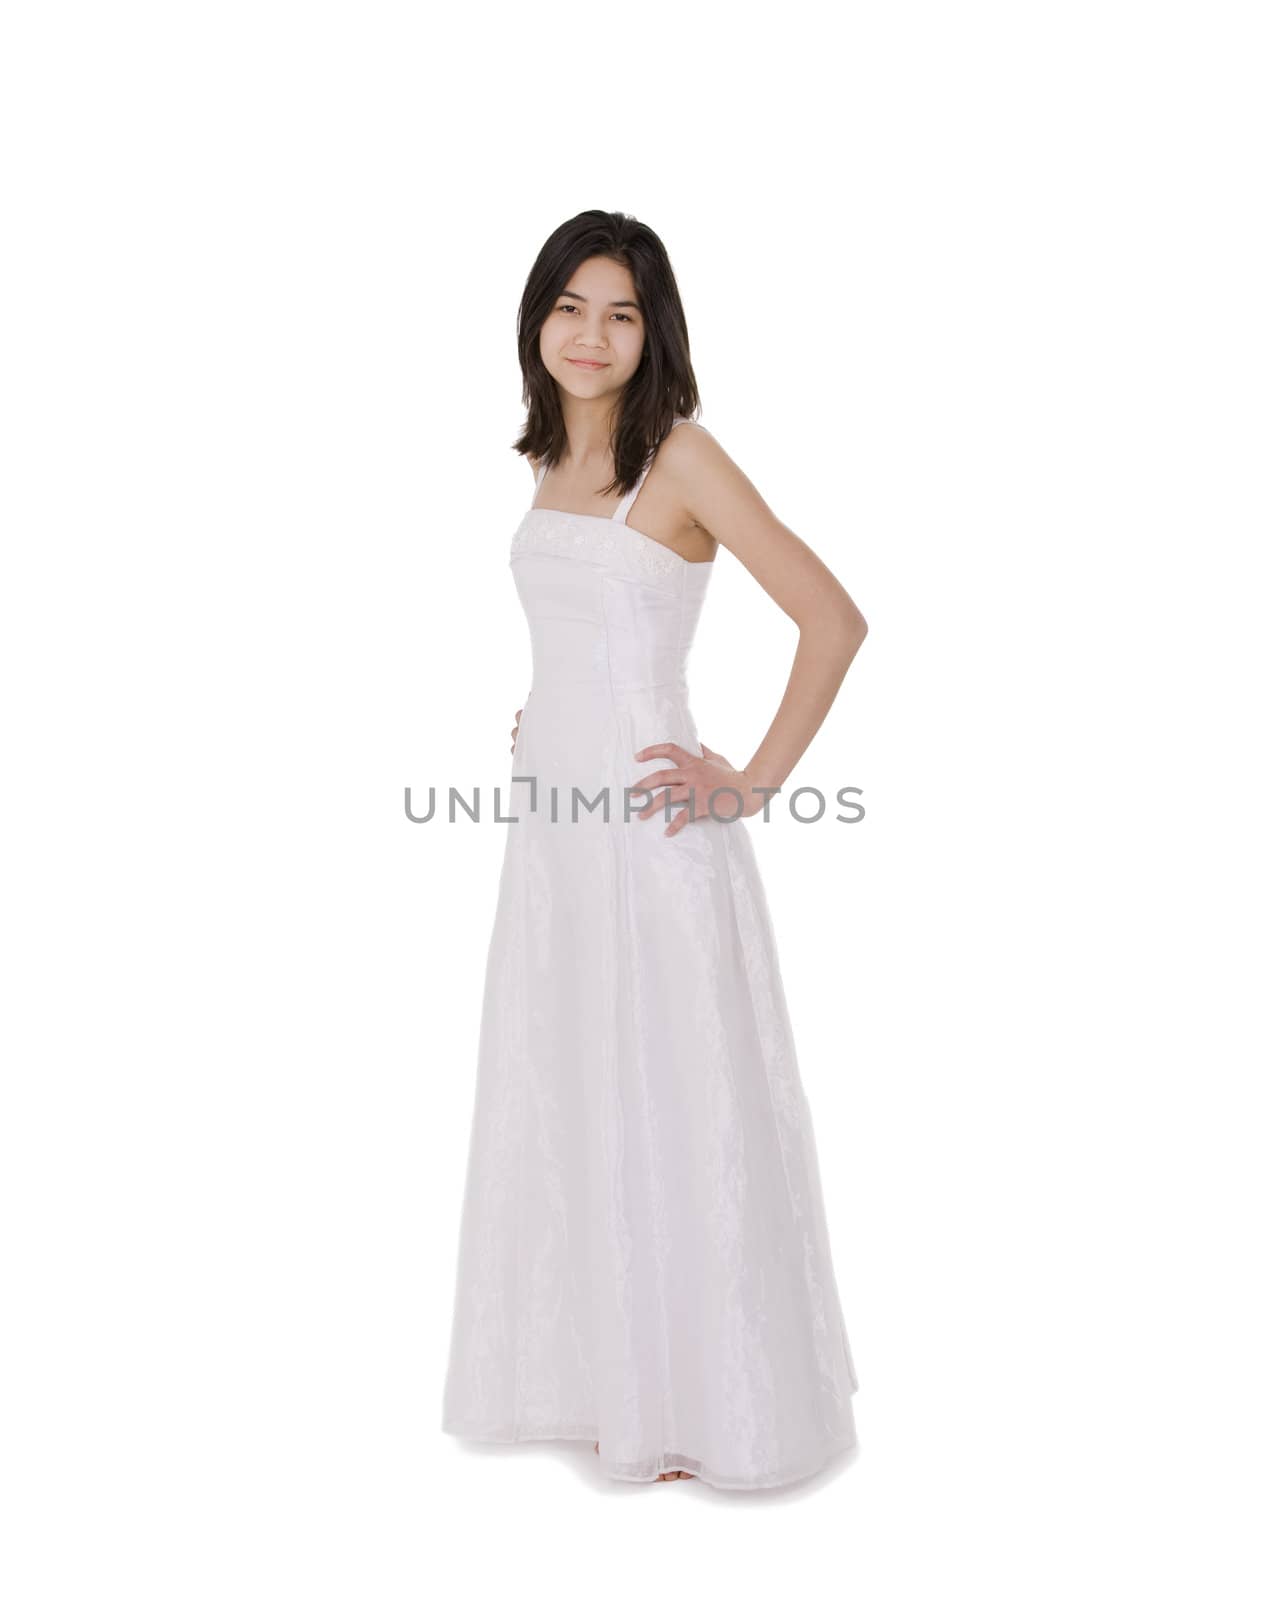 Beautiful young teen girl in white dress or gown, isolated on white